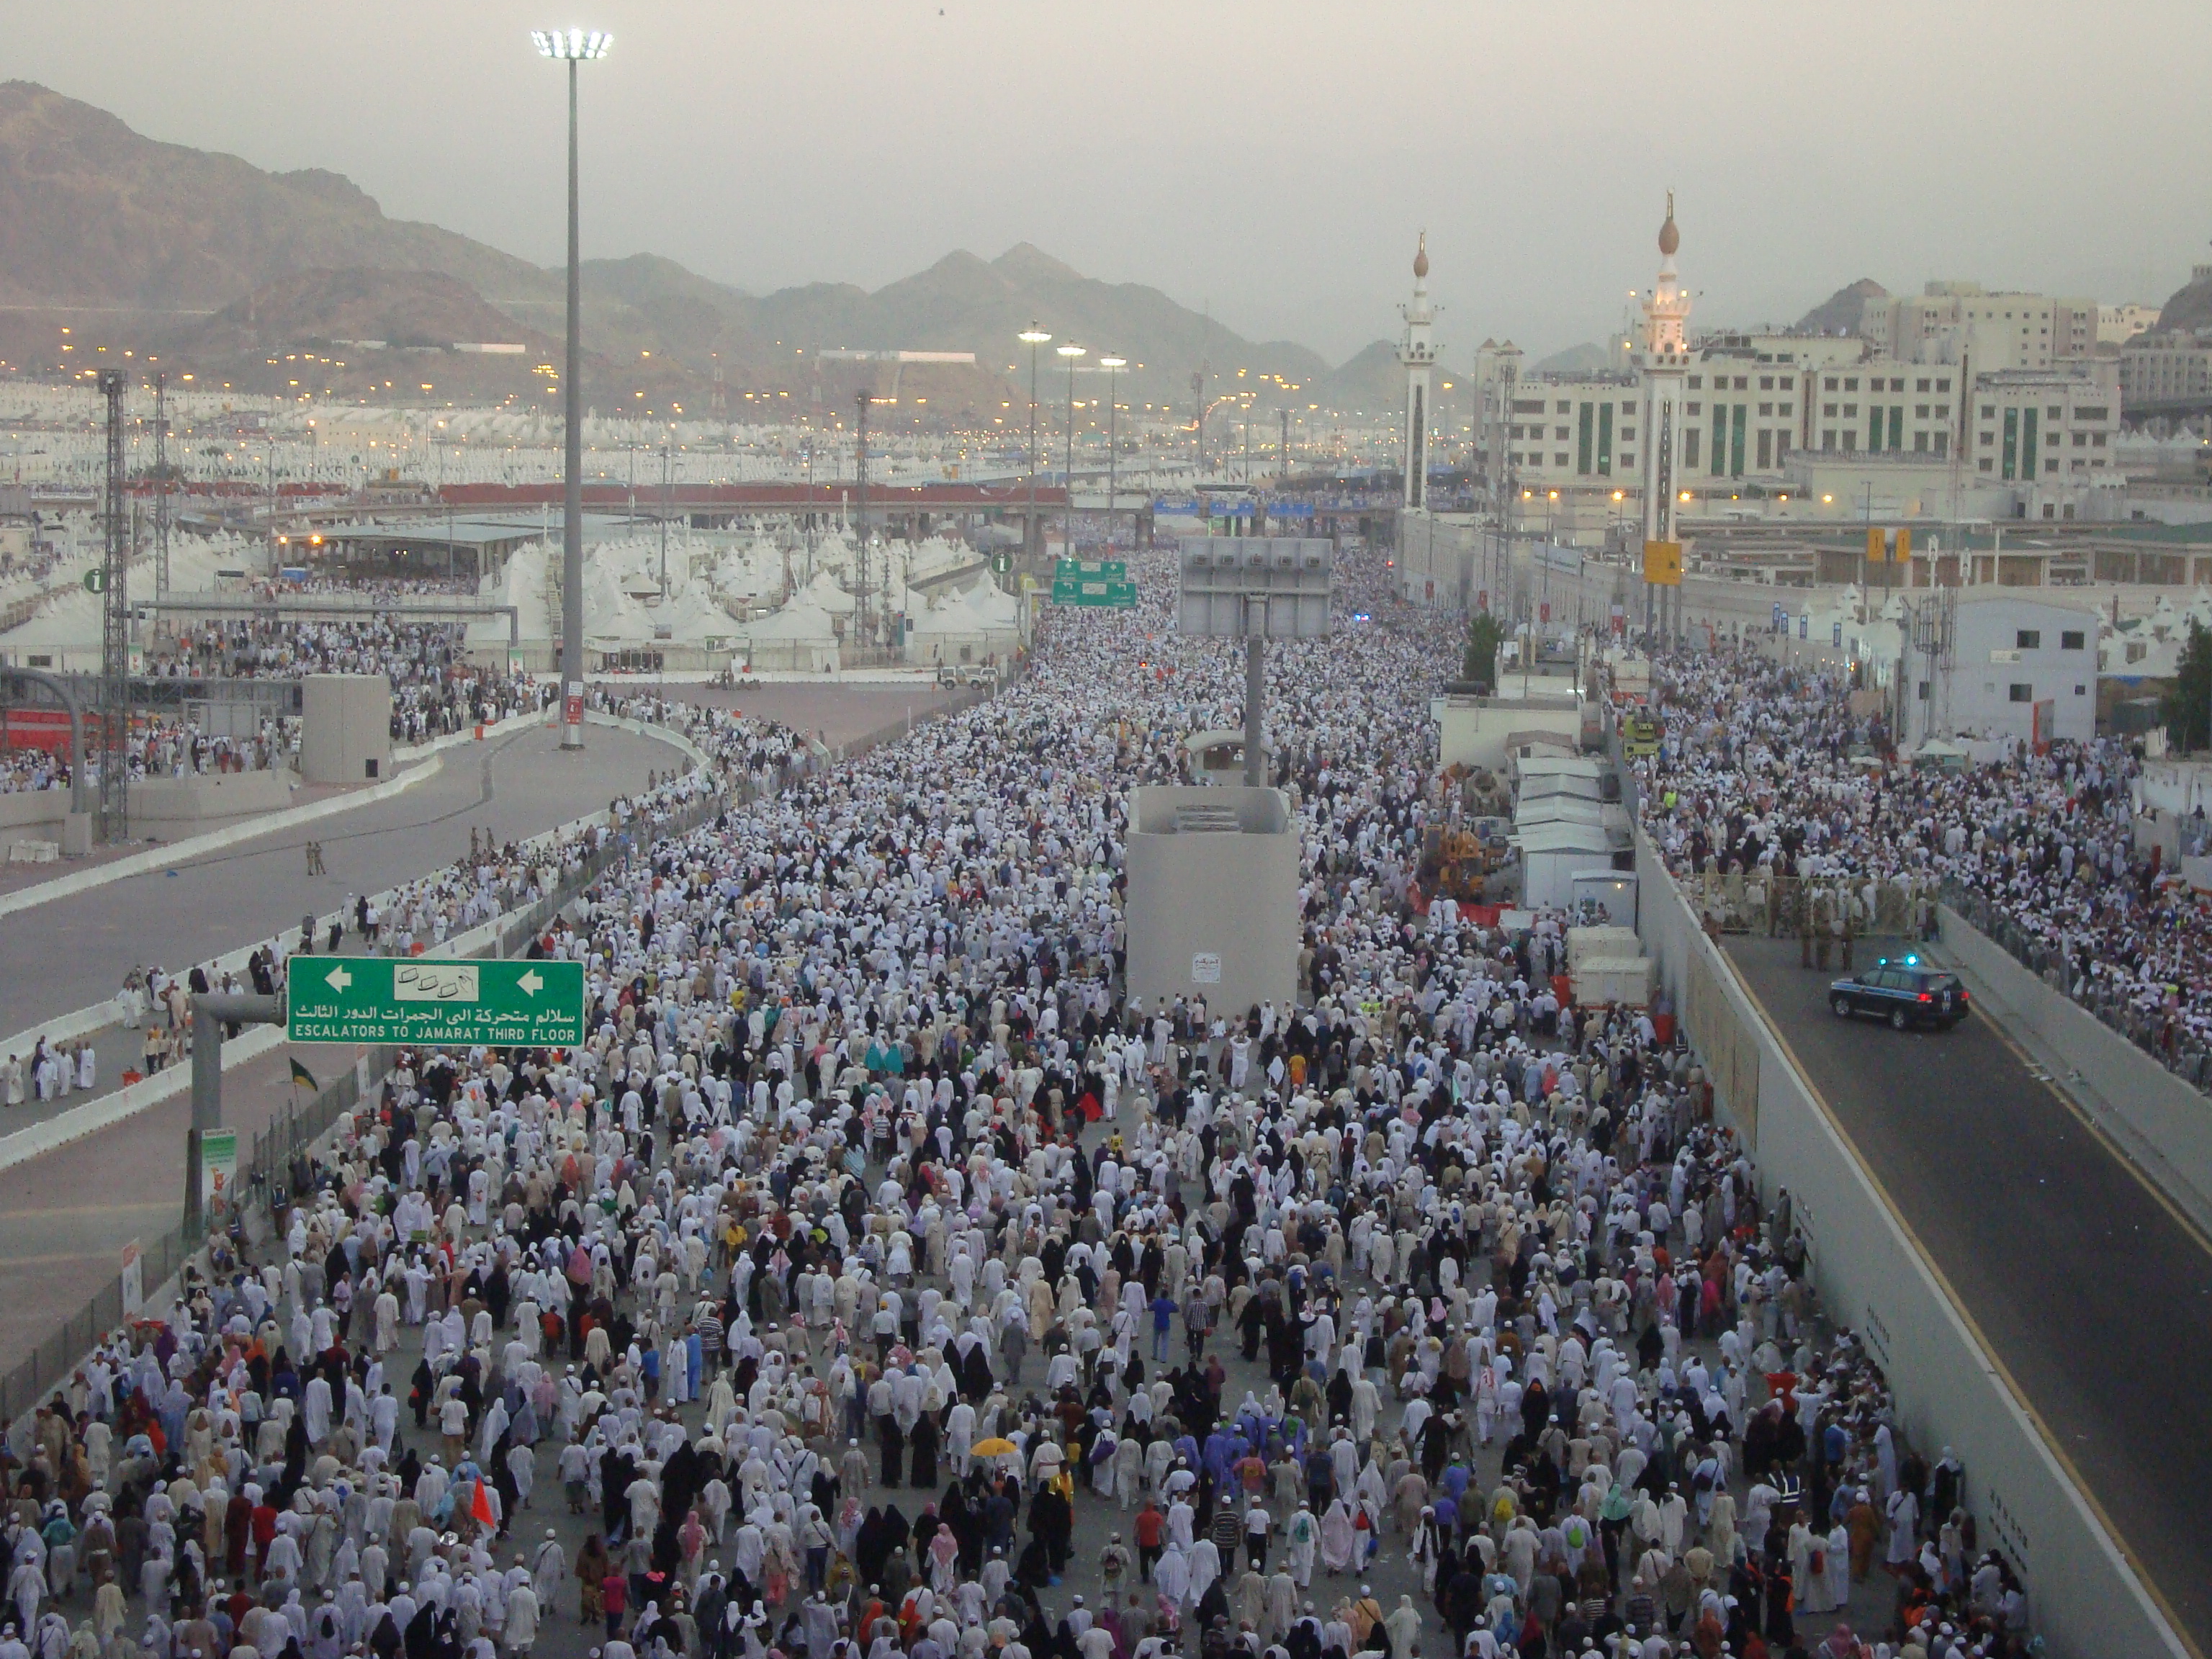 At least 1,100 people are killed and another 934 wounded after a stampede during the Hajj in Saudi Arabia.